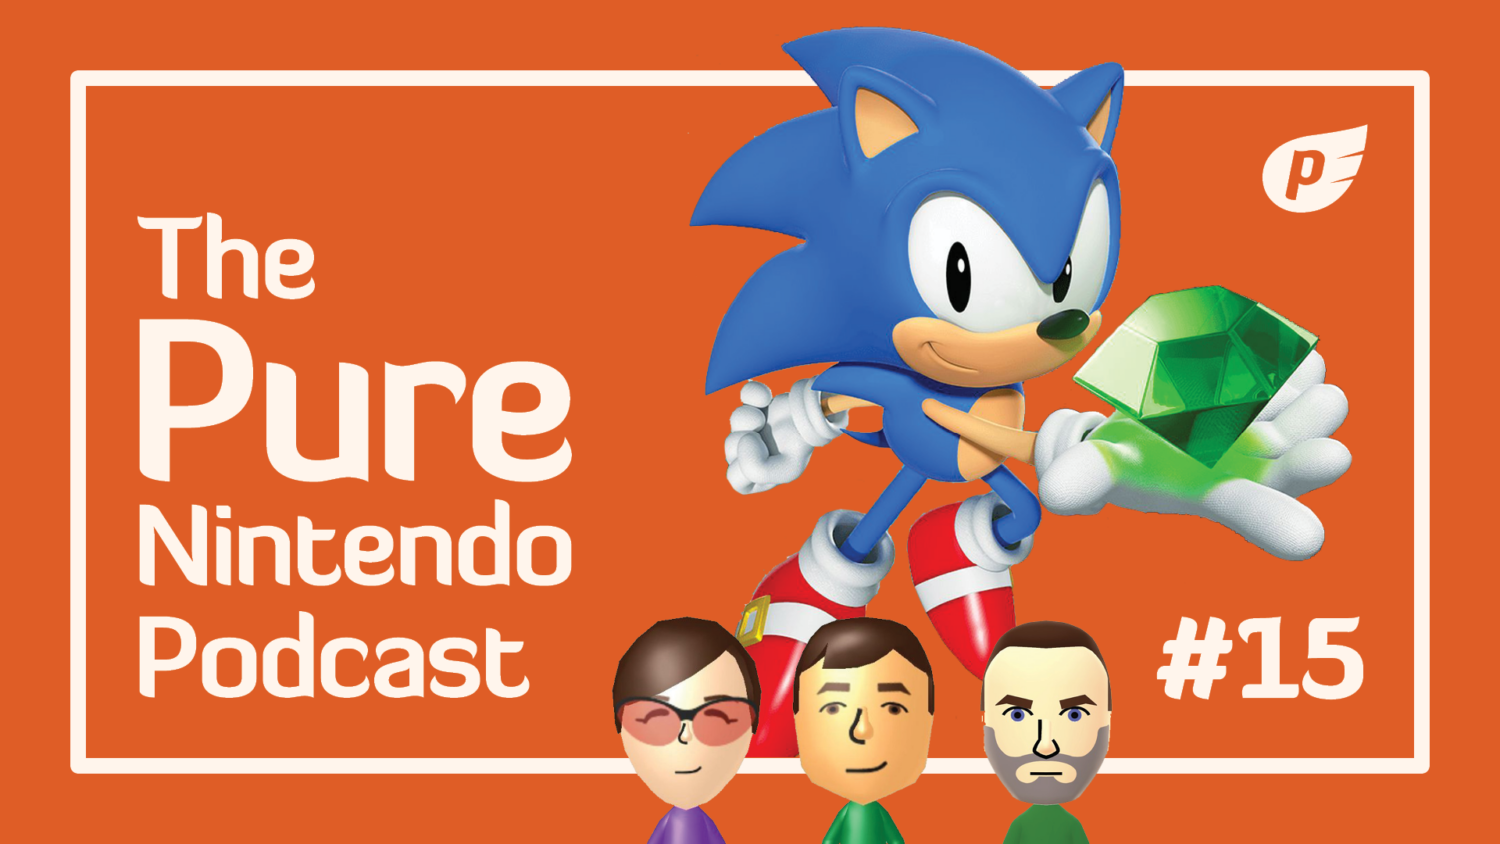 The Pure Nintendo Podcast - Episode 15, featuring Sonic the Hedgehog